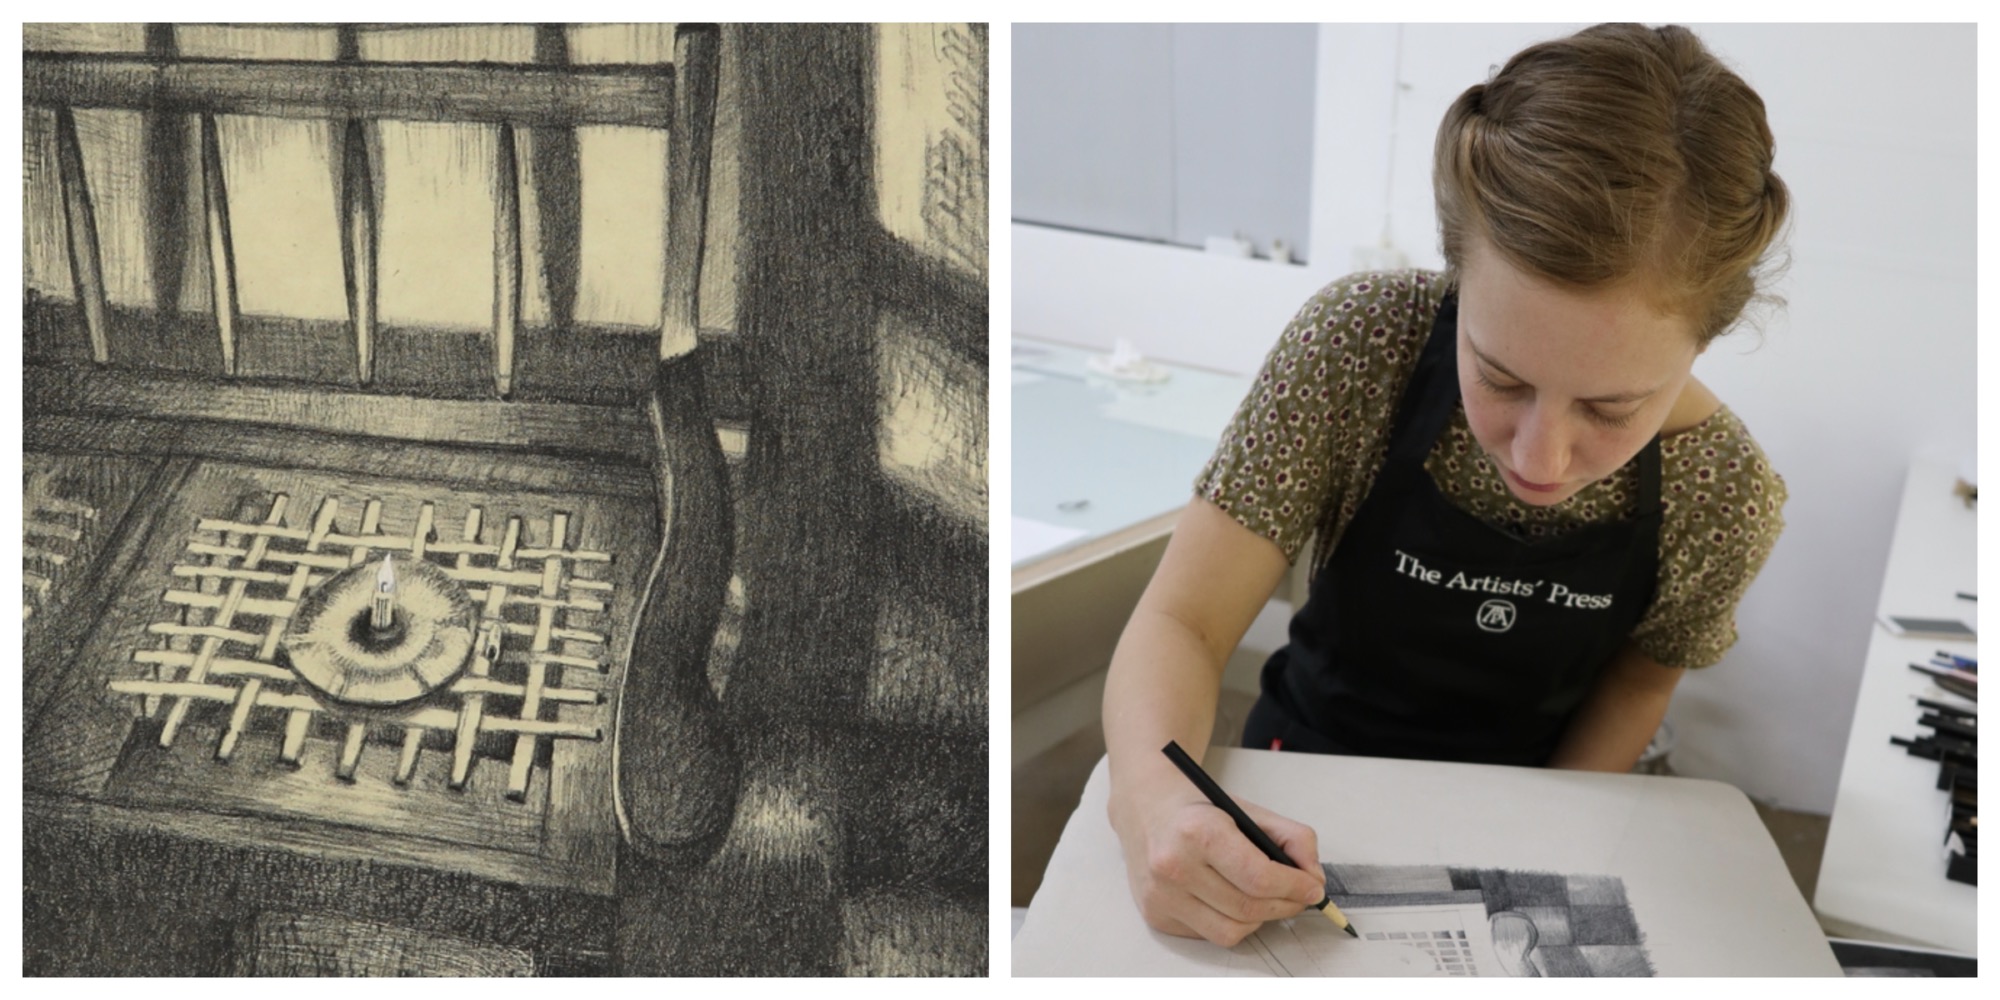 Georgina Berens working on lithograph as a link to her web page